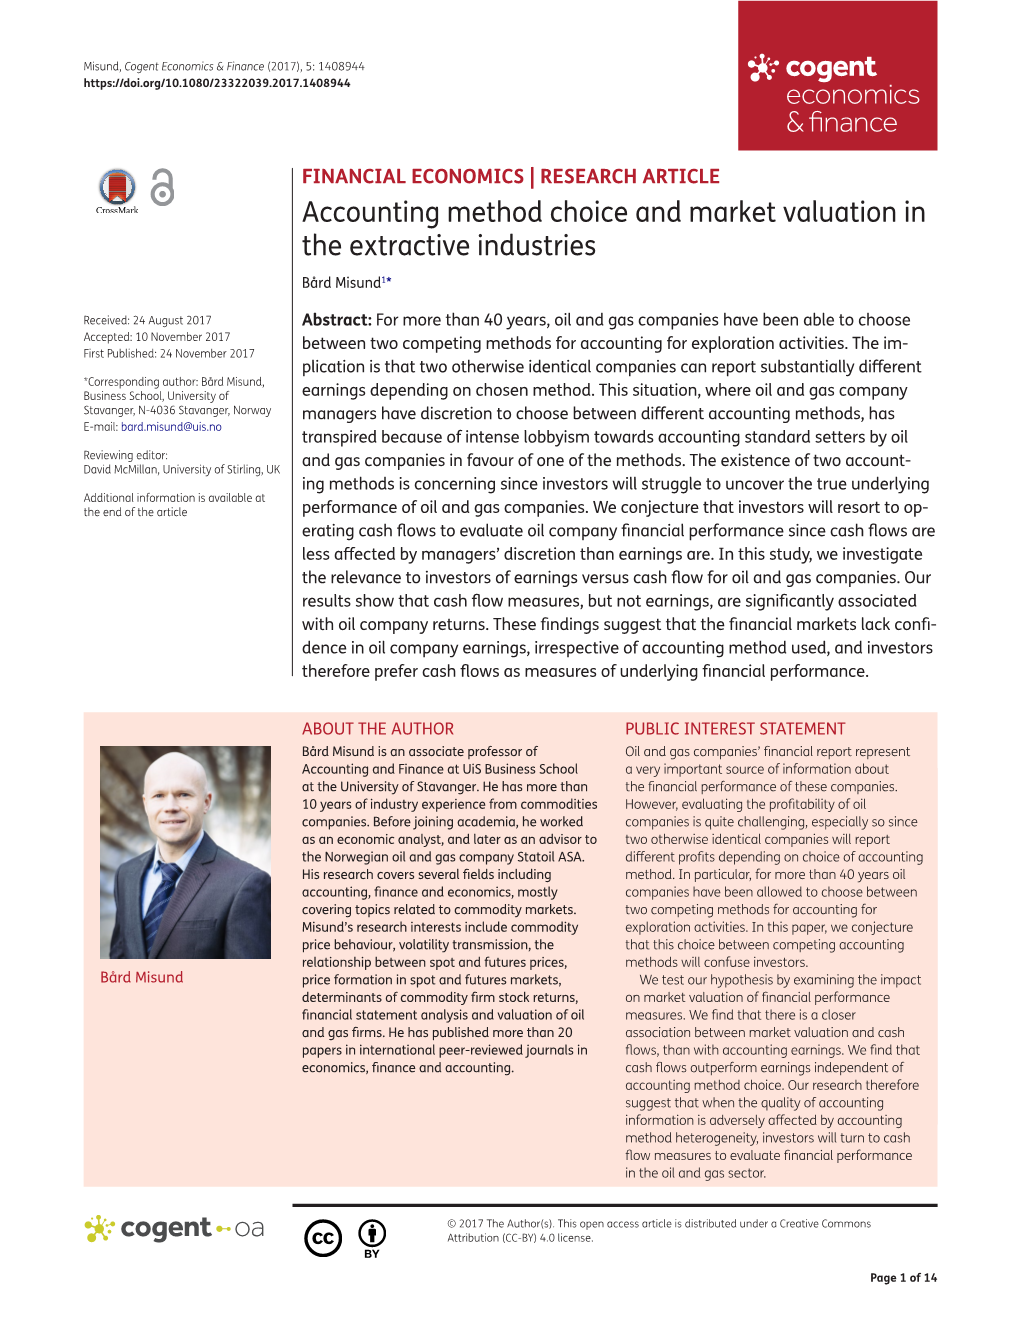 Accounting Method Choice and Market Valuation in the Extractive Industries Bård Misund1*